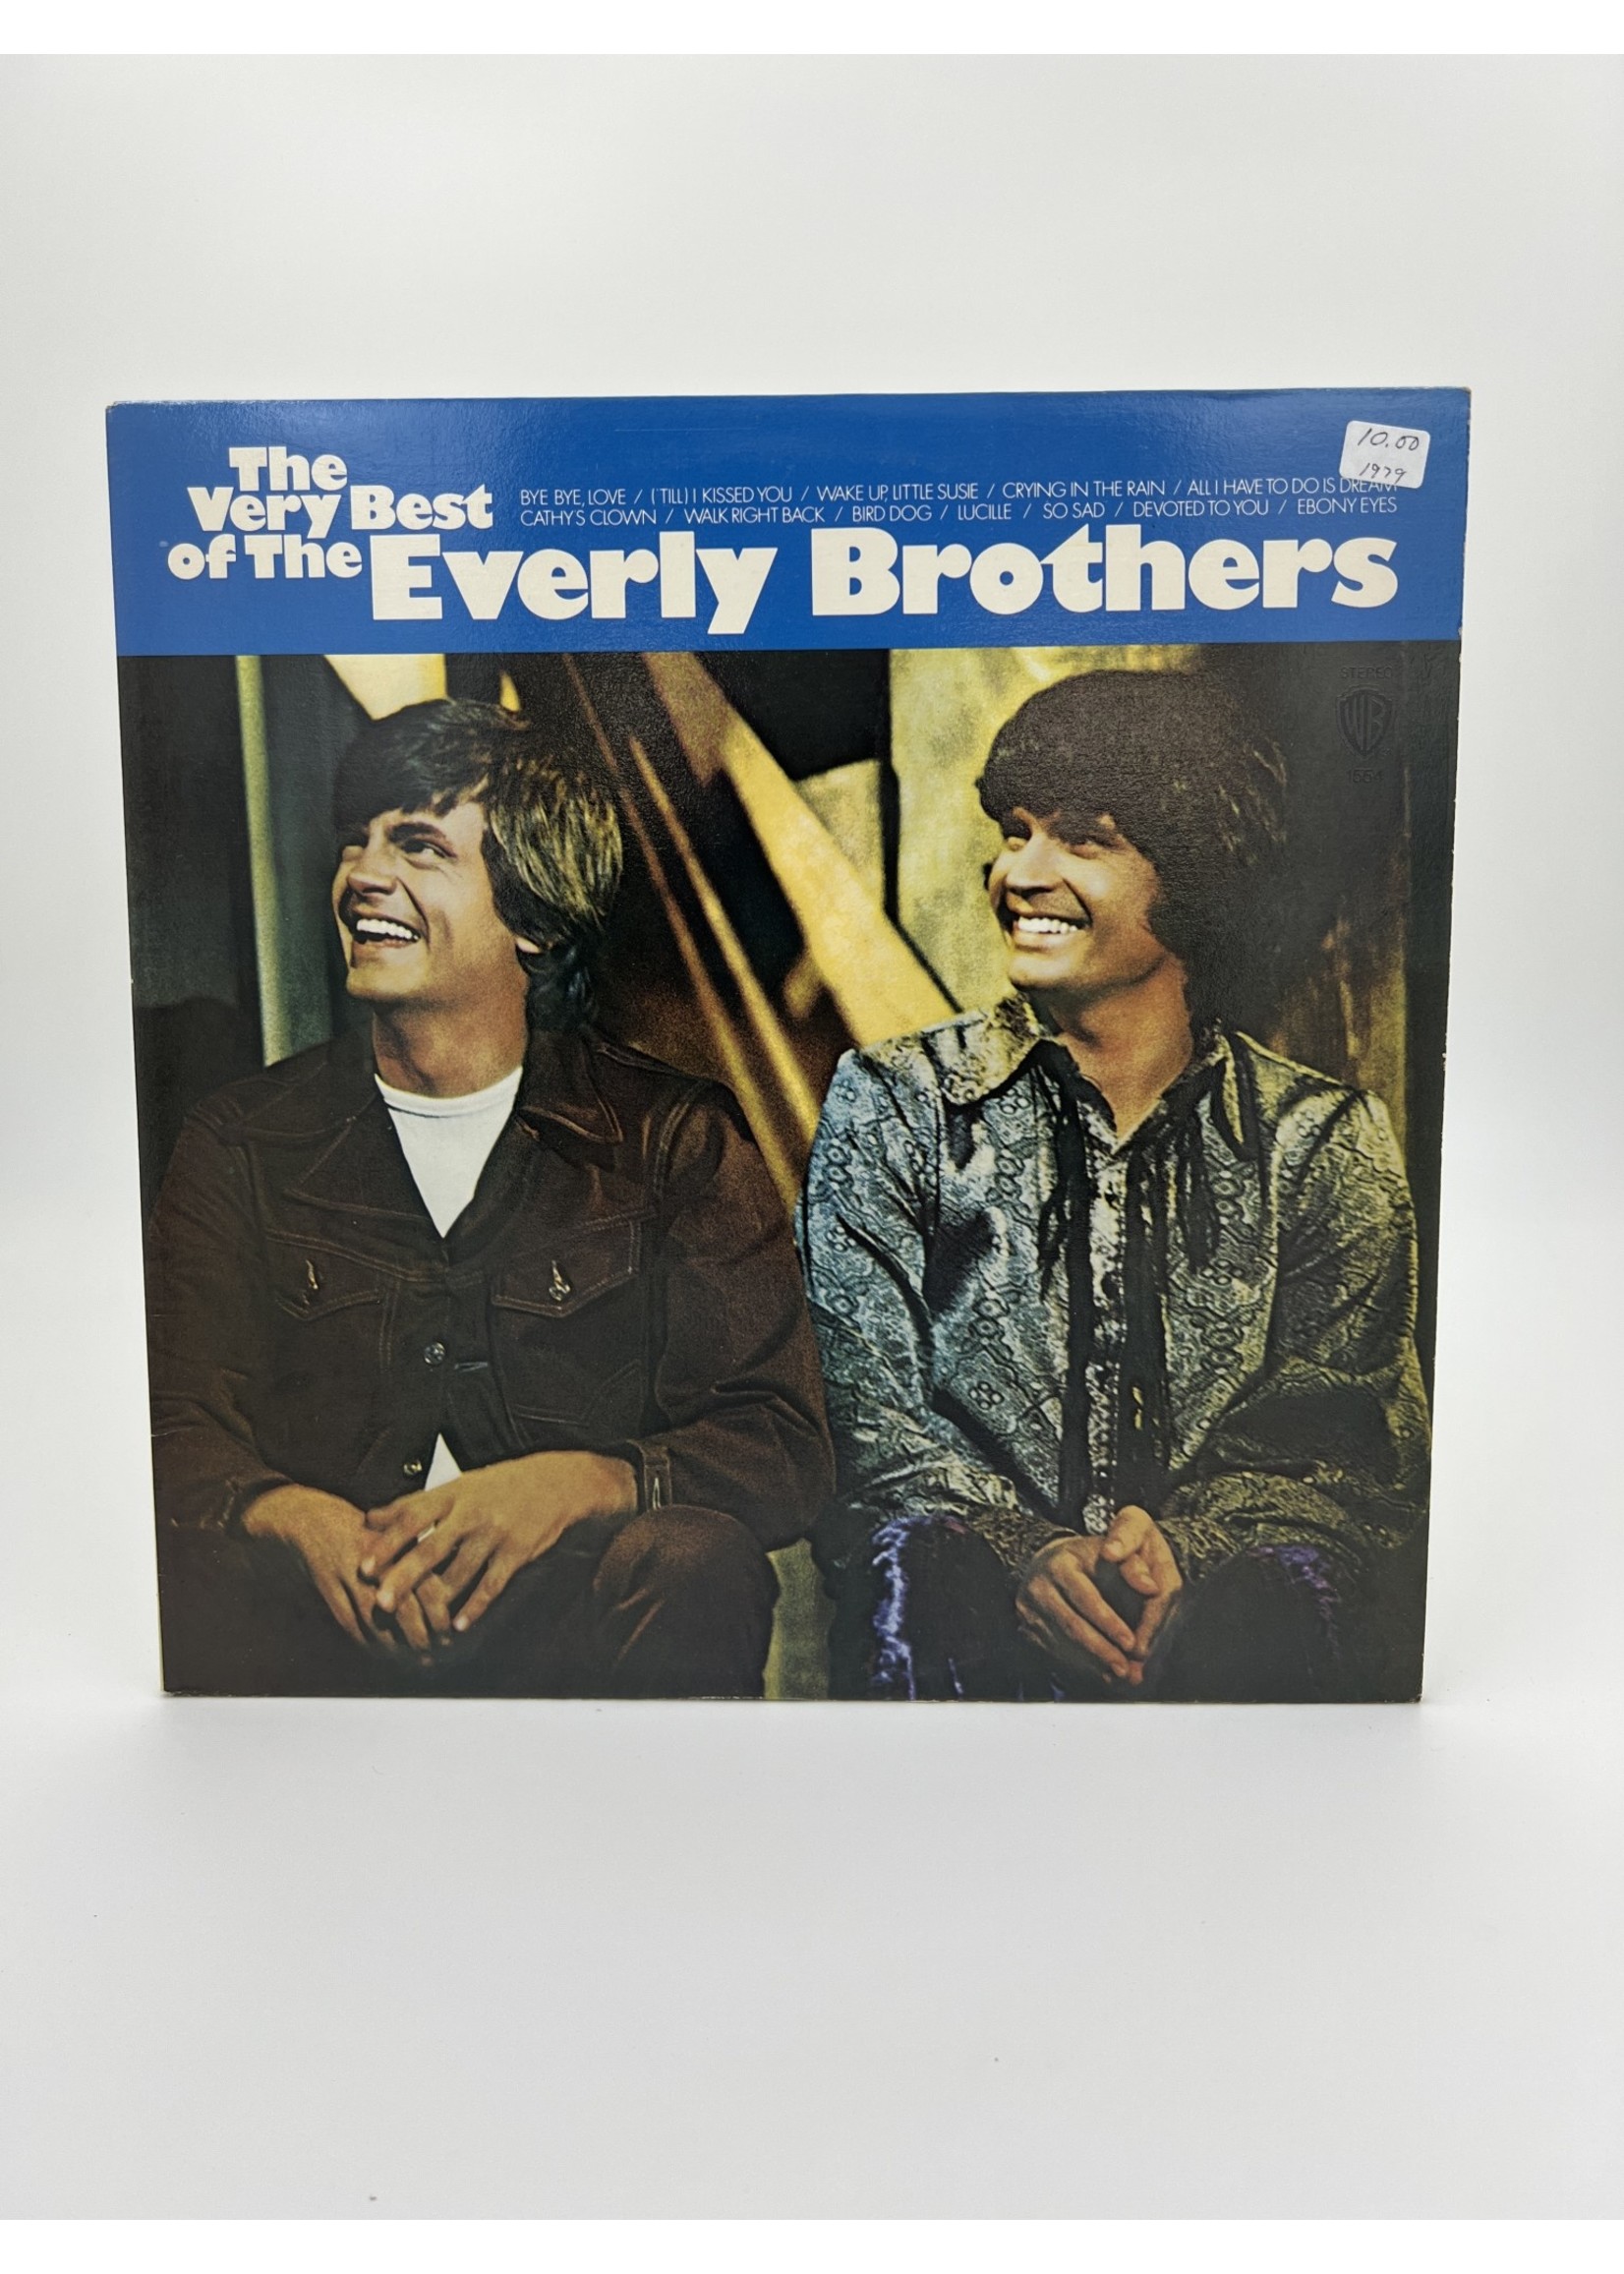 LP The Very Best Of The Everly Brothers Lp Record